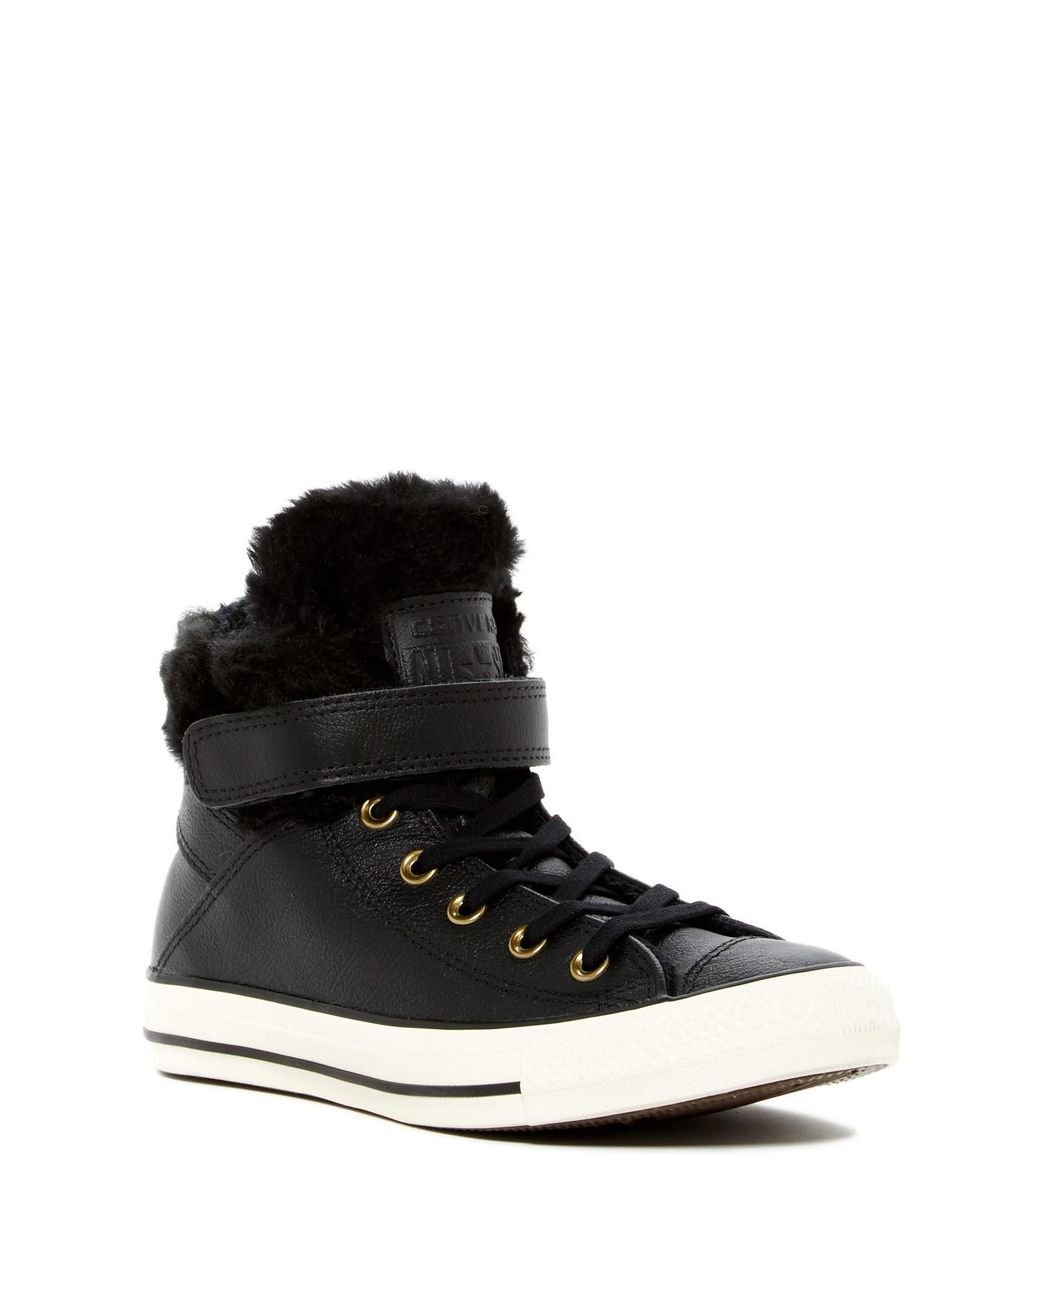 Converse, Shoes, Brown Leather Converse High Top With Fur Inside